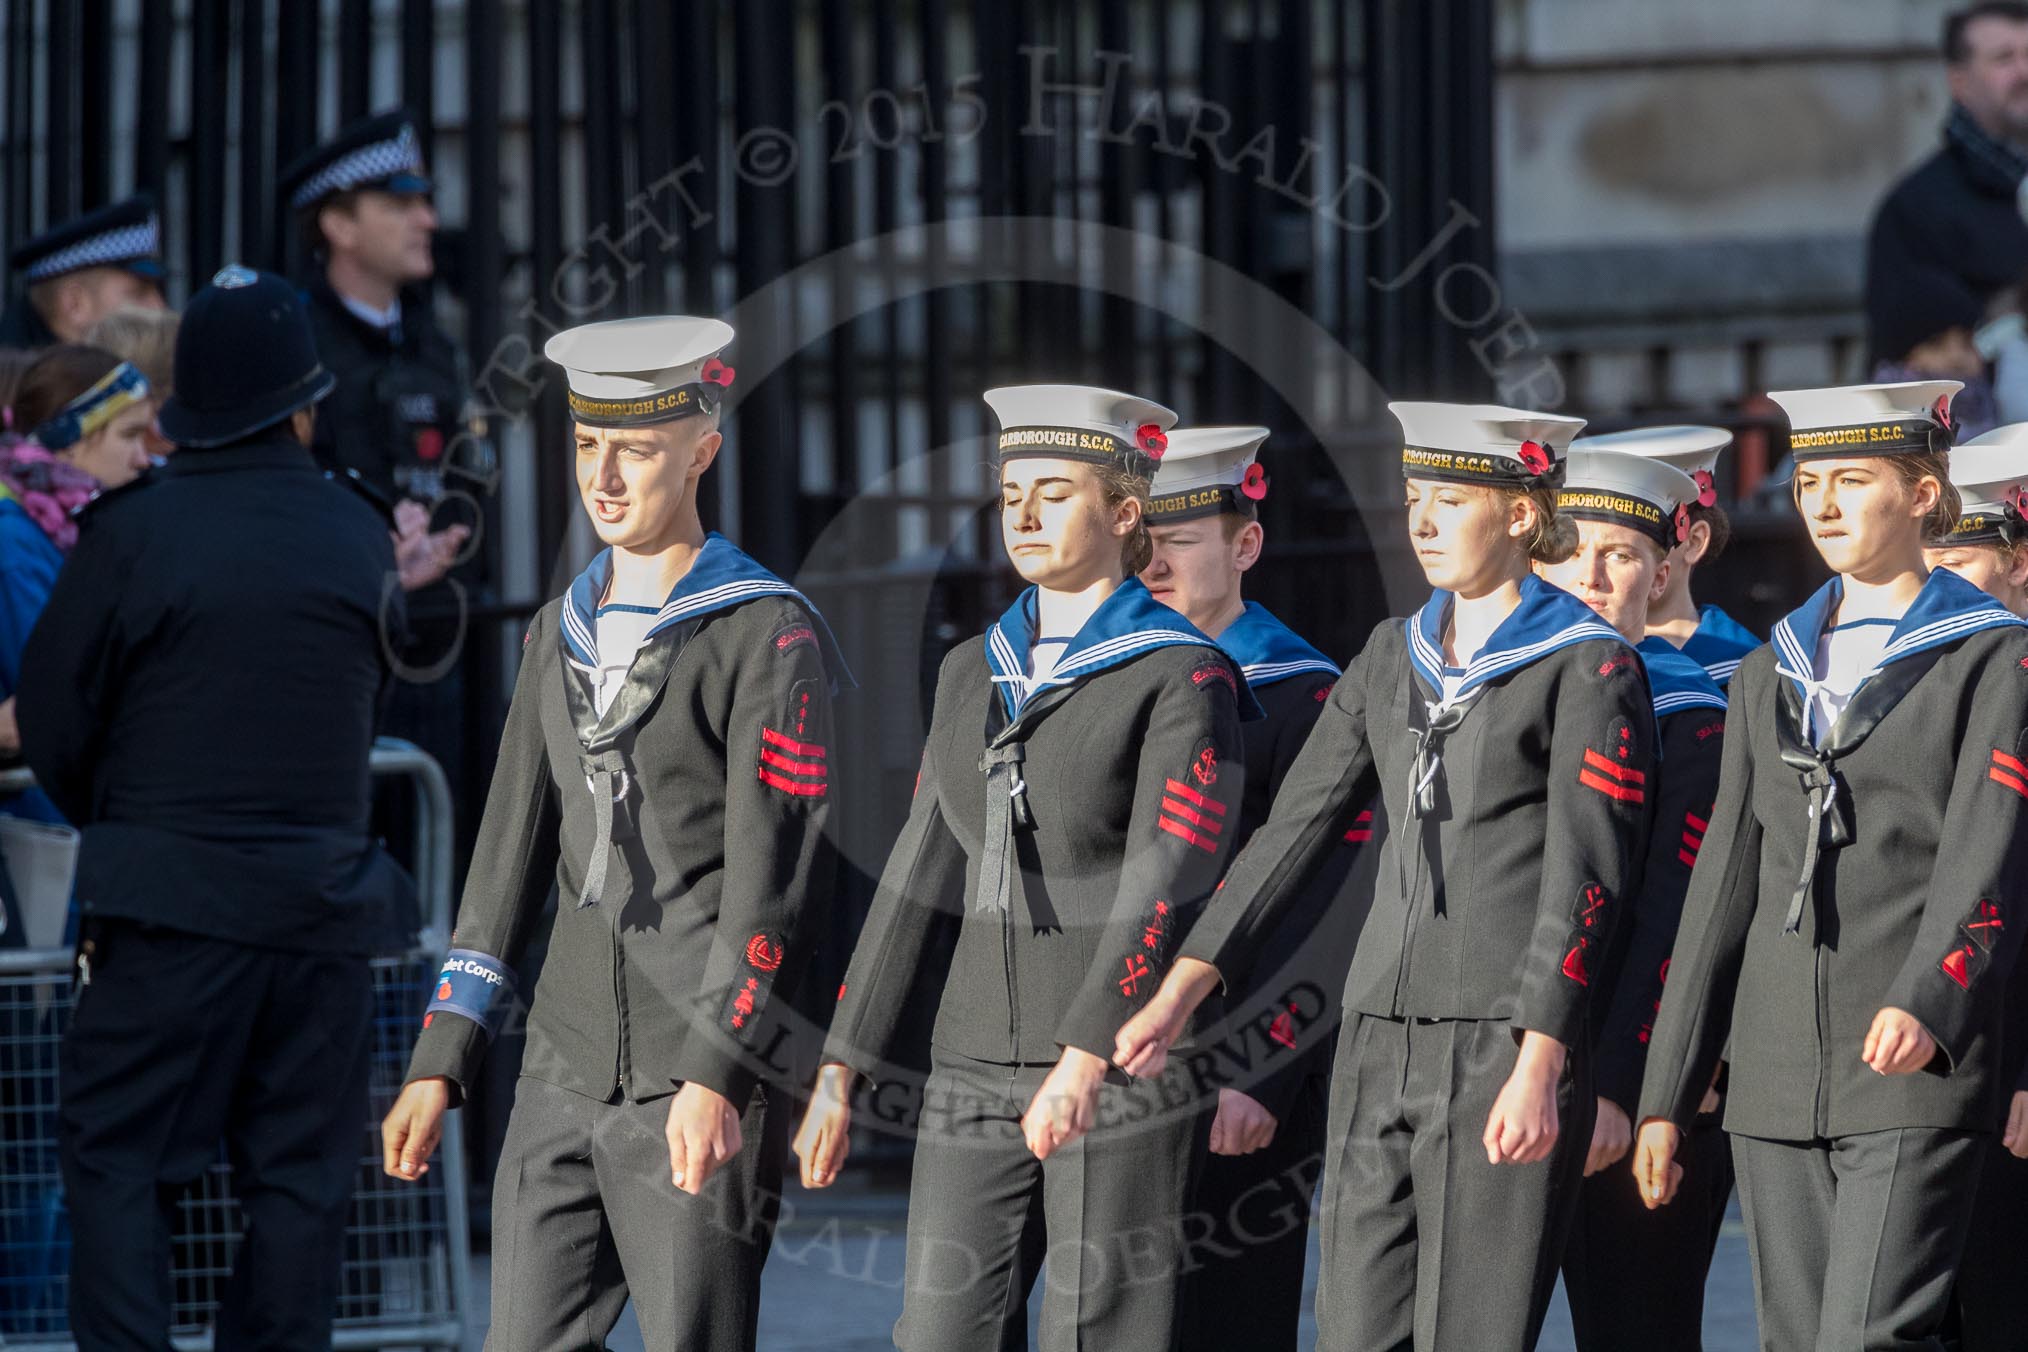 March Past, Remembrance Sunday at the Cenotaph 2016: M32 Army and combined Cadet Force.
Cenotaph, Whitehall, London SW1,
London,
Greater London,
United Kingdom,
on 13 November 2016 at 13:17, image #2781